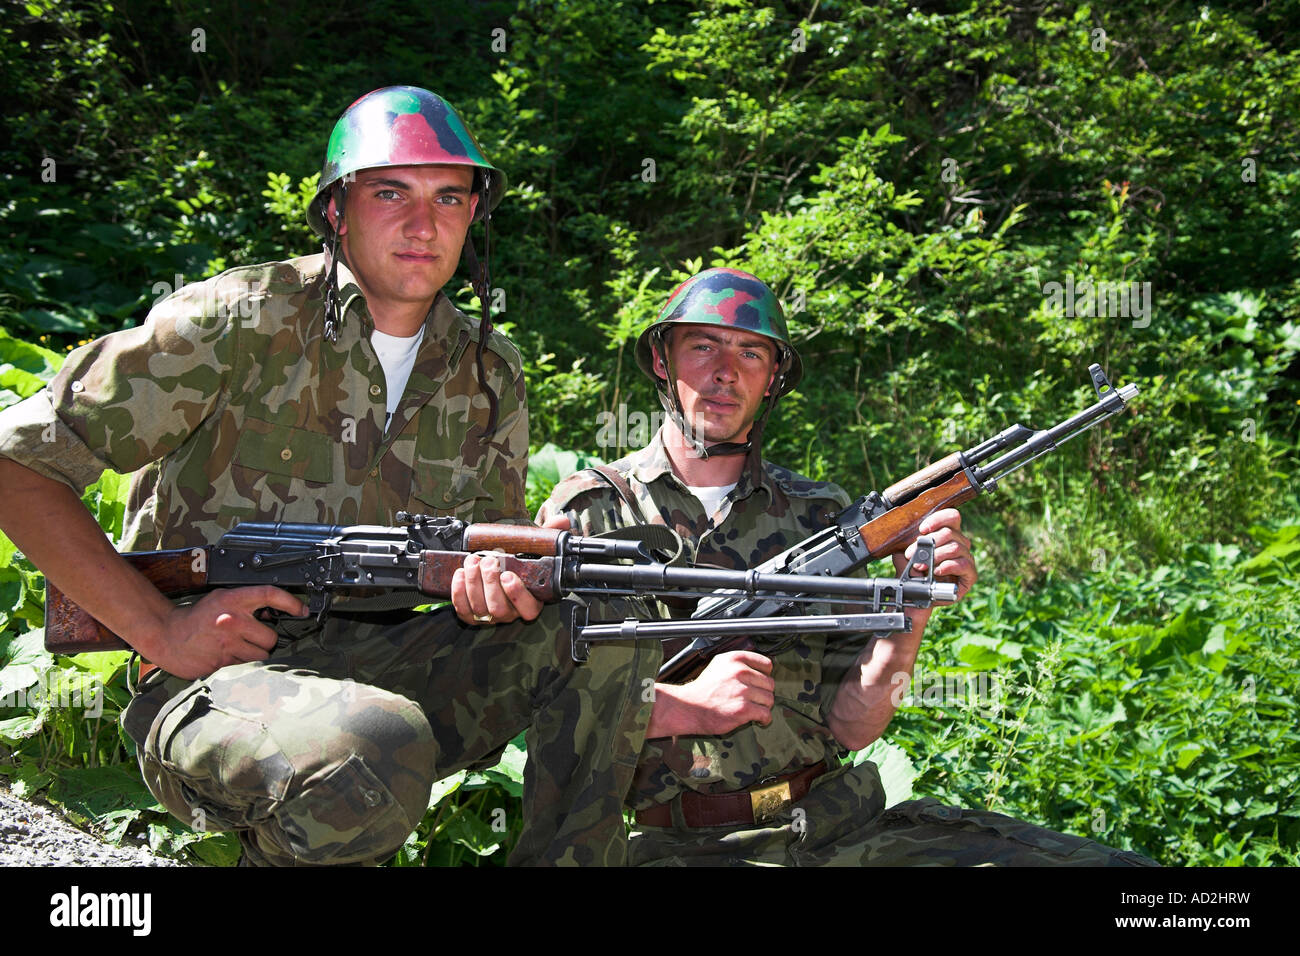 Soldiers posing with rifles, Romania Stock Photo